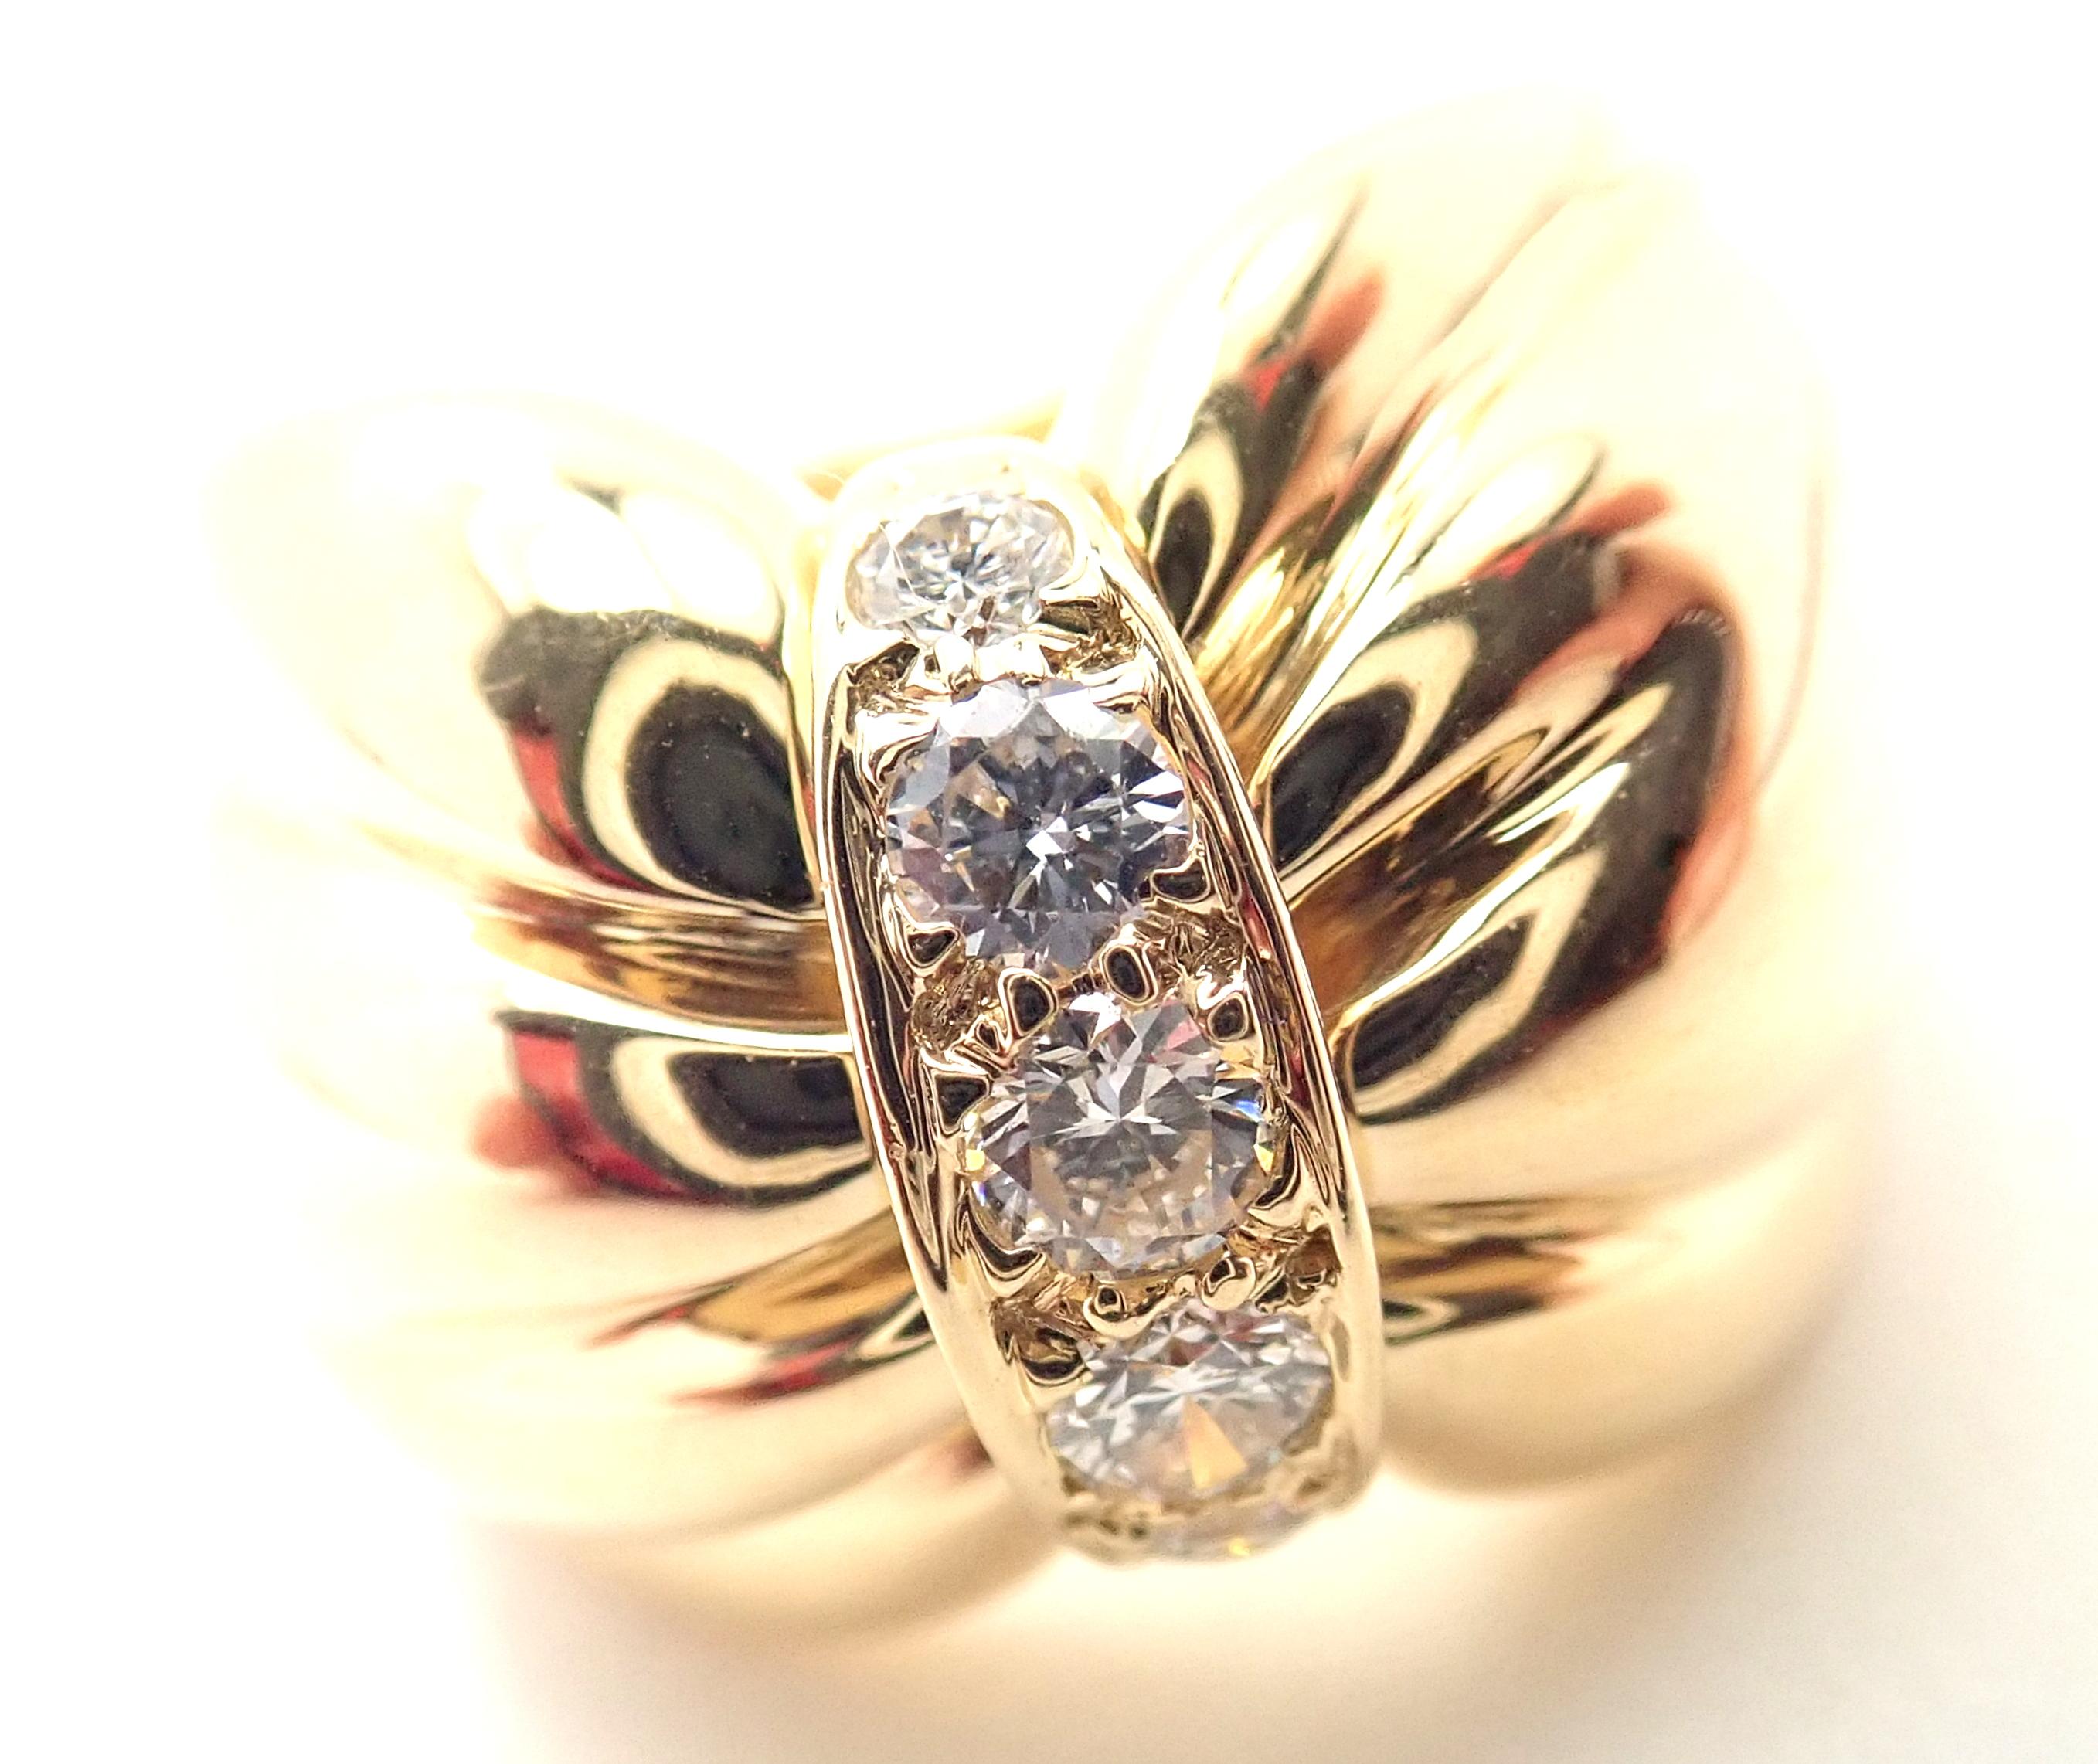 18k Yellow Gold Diamond Bow Ring by Van Cleef & Arpels.
With 5 round brilliant cut diamonds approximately .25ct total weight
VS1 clarity, G color
Details:
Ring Size: 5.5
Width: 15mm
Weight: 10.9 grams
Stamped Hallmarks: VCA 750 854XXXX(serial number